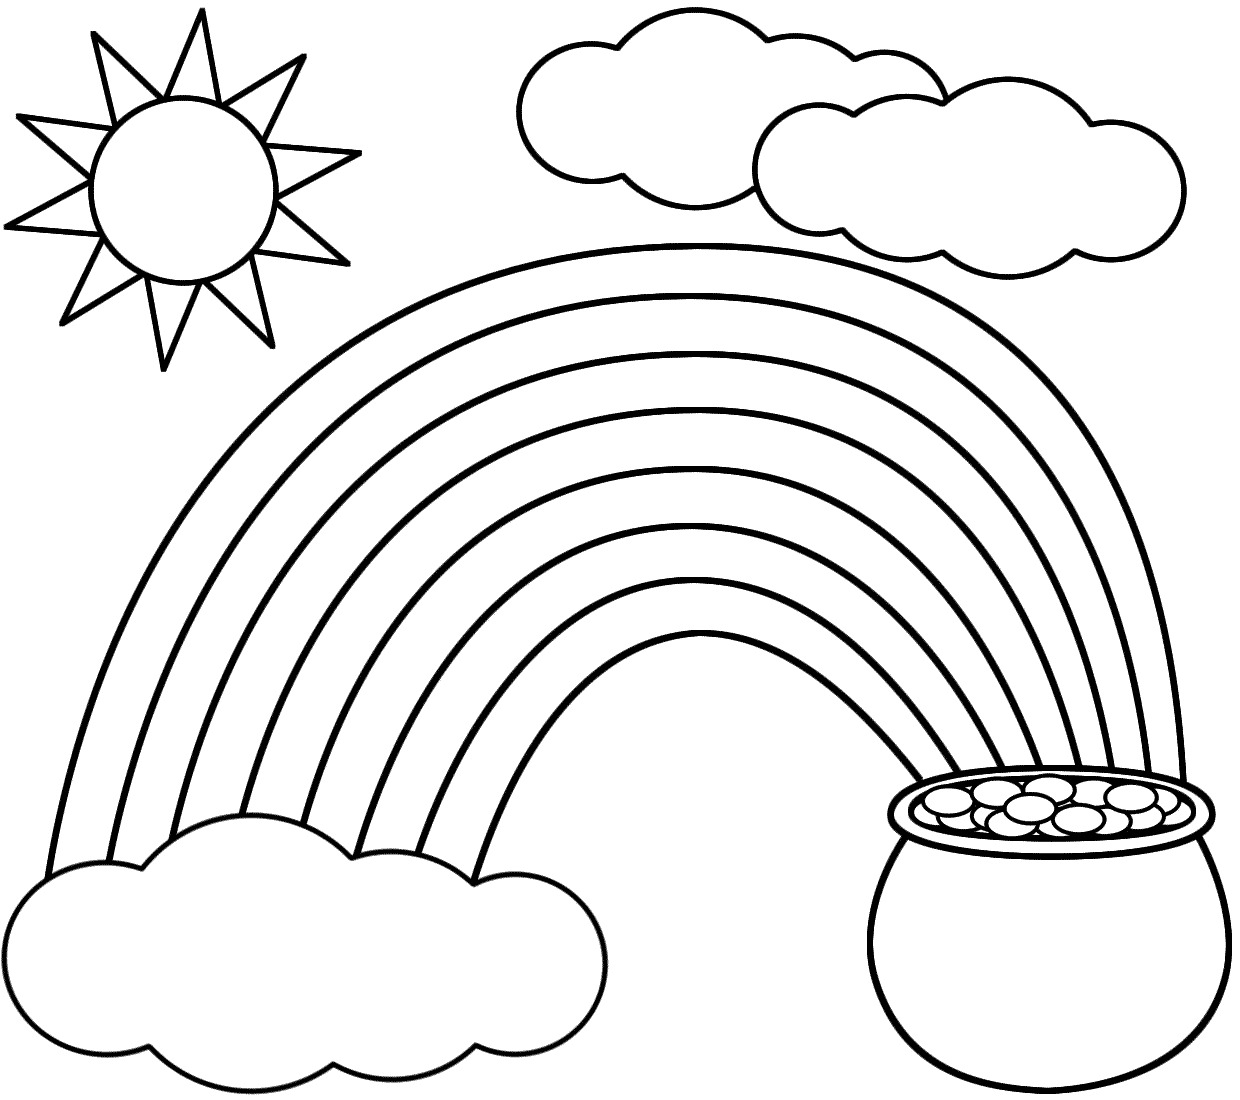 St Patricks Day Coloring Pages Best Coloring Pages For Kids